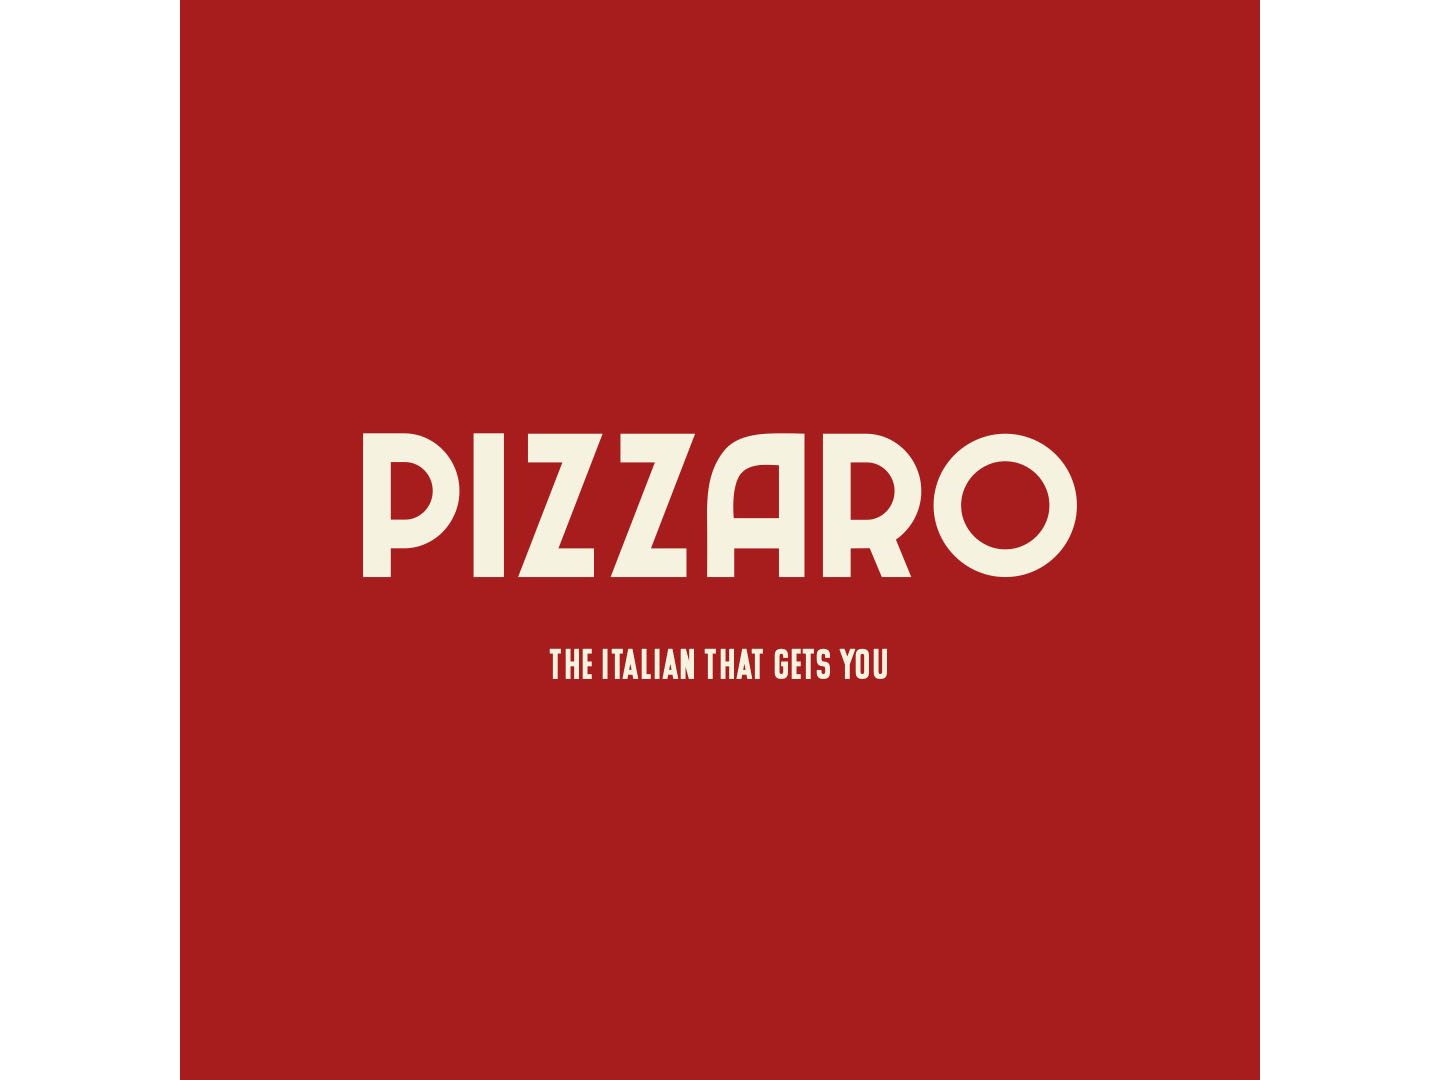 Pizzaro rolls out new brand identity